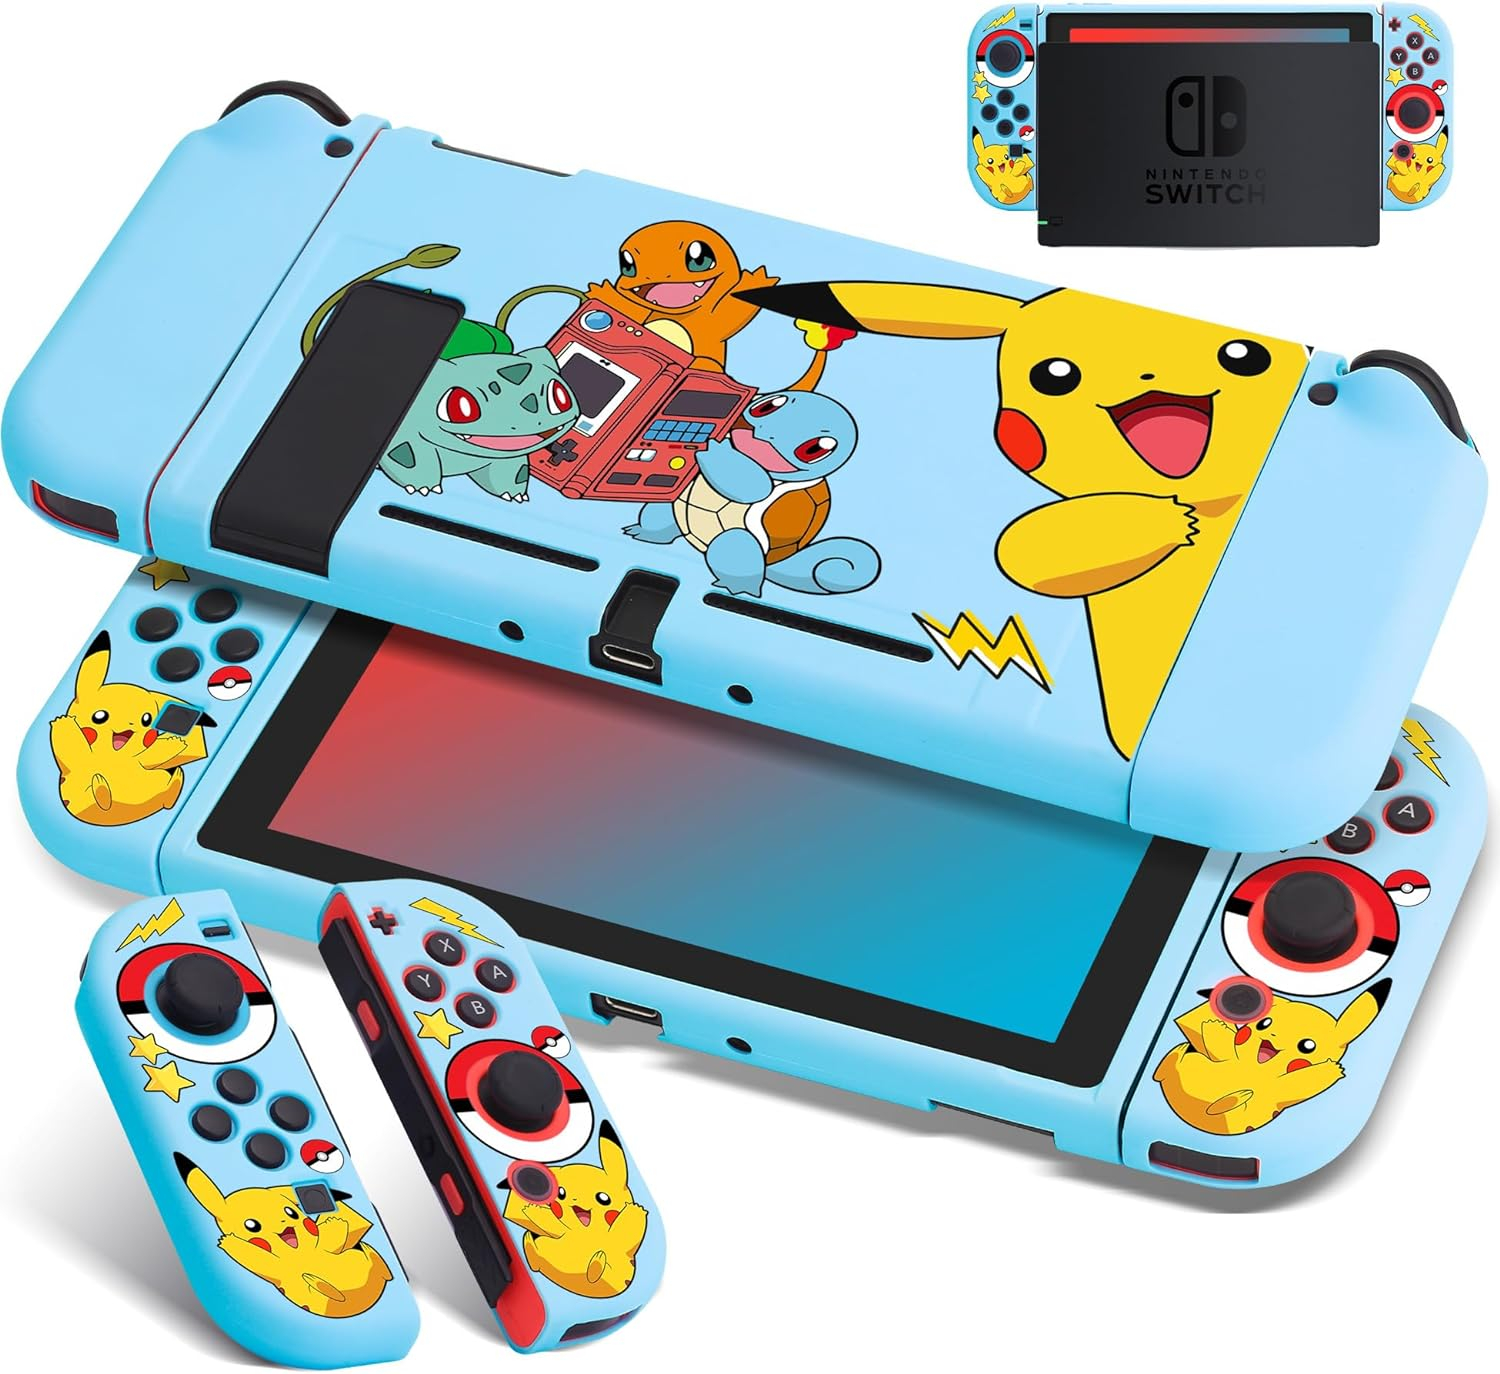 Xcitifun Protective Case Designed for Nintendo Switch Soft TPU Cases for Girls Boys Kids Cartoon Cute Kawaii Character Switch Shell Compatible with Nintendo Switch Controller Cover - Blue Play Game